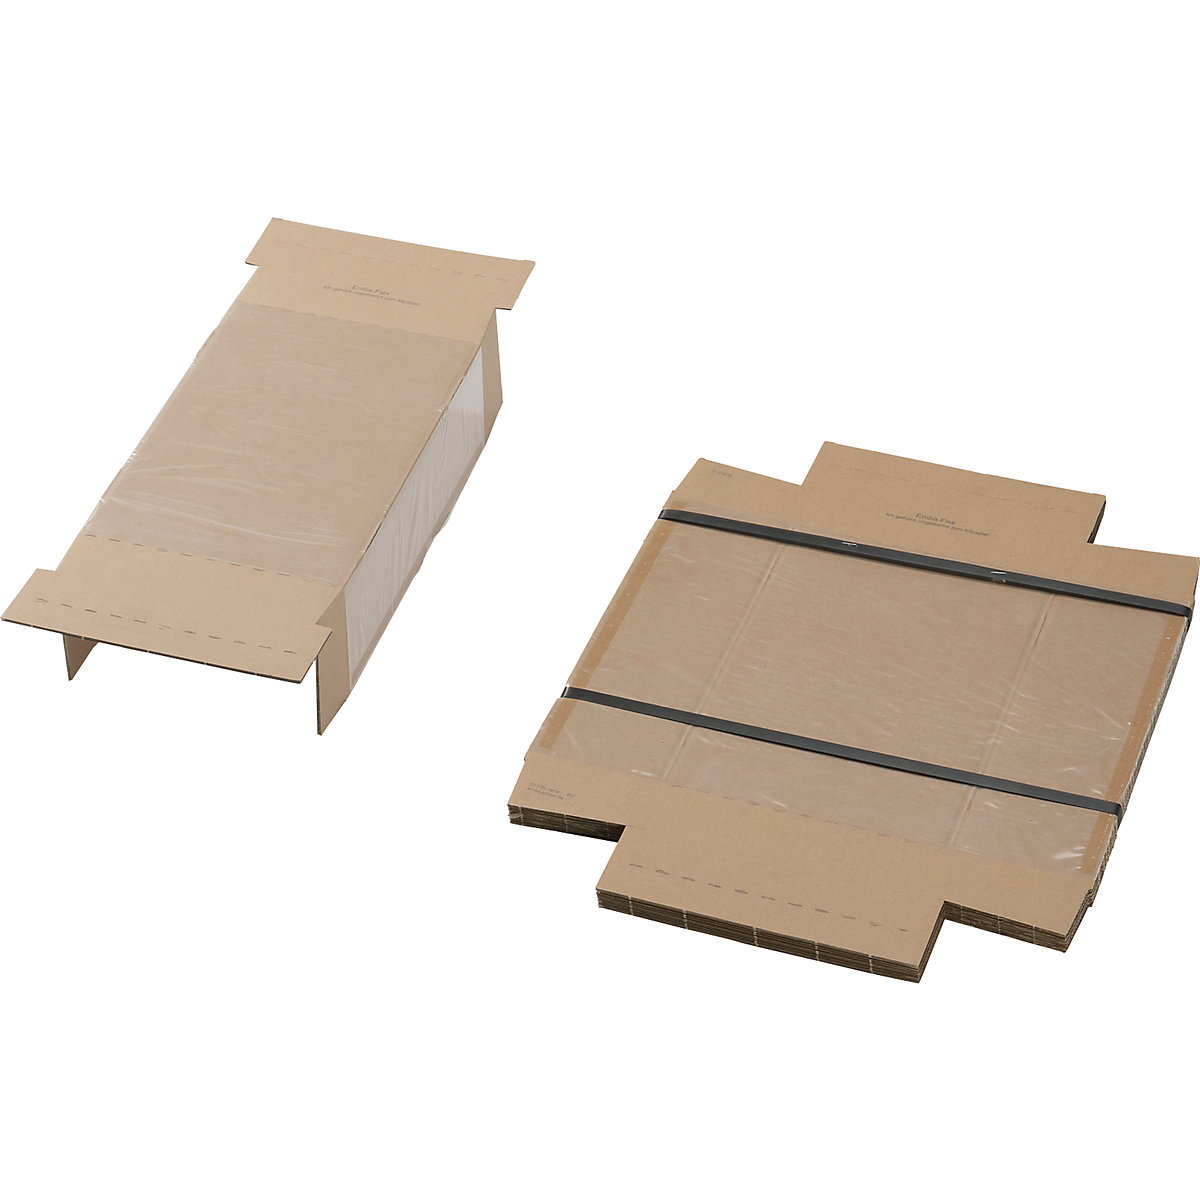 Retention packaging, with retention insert and outside box, pack of 25, for package dims. LxWxH 300 x 200 x 100 mm-4